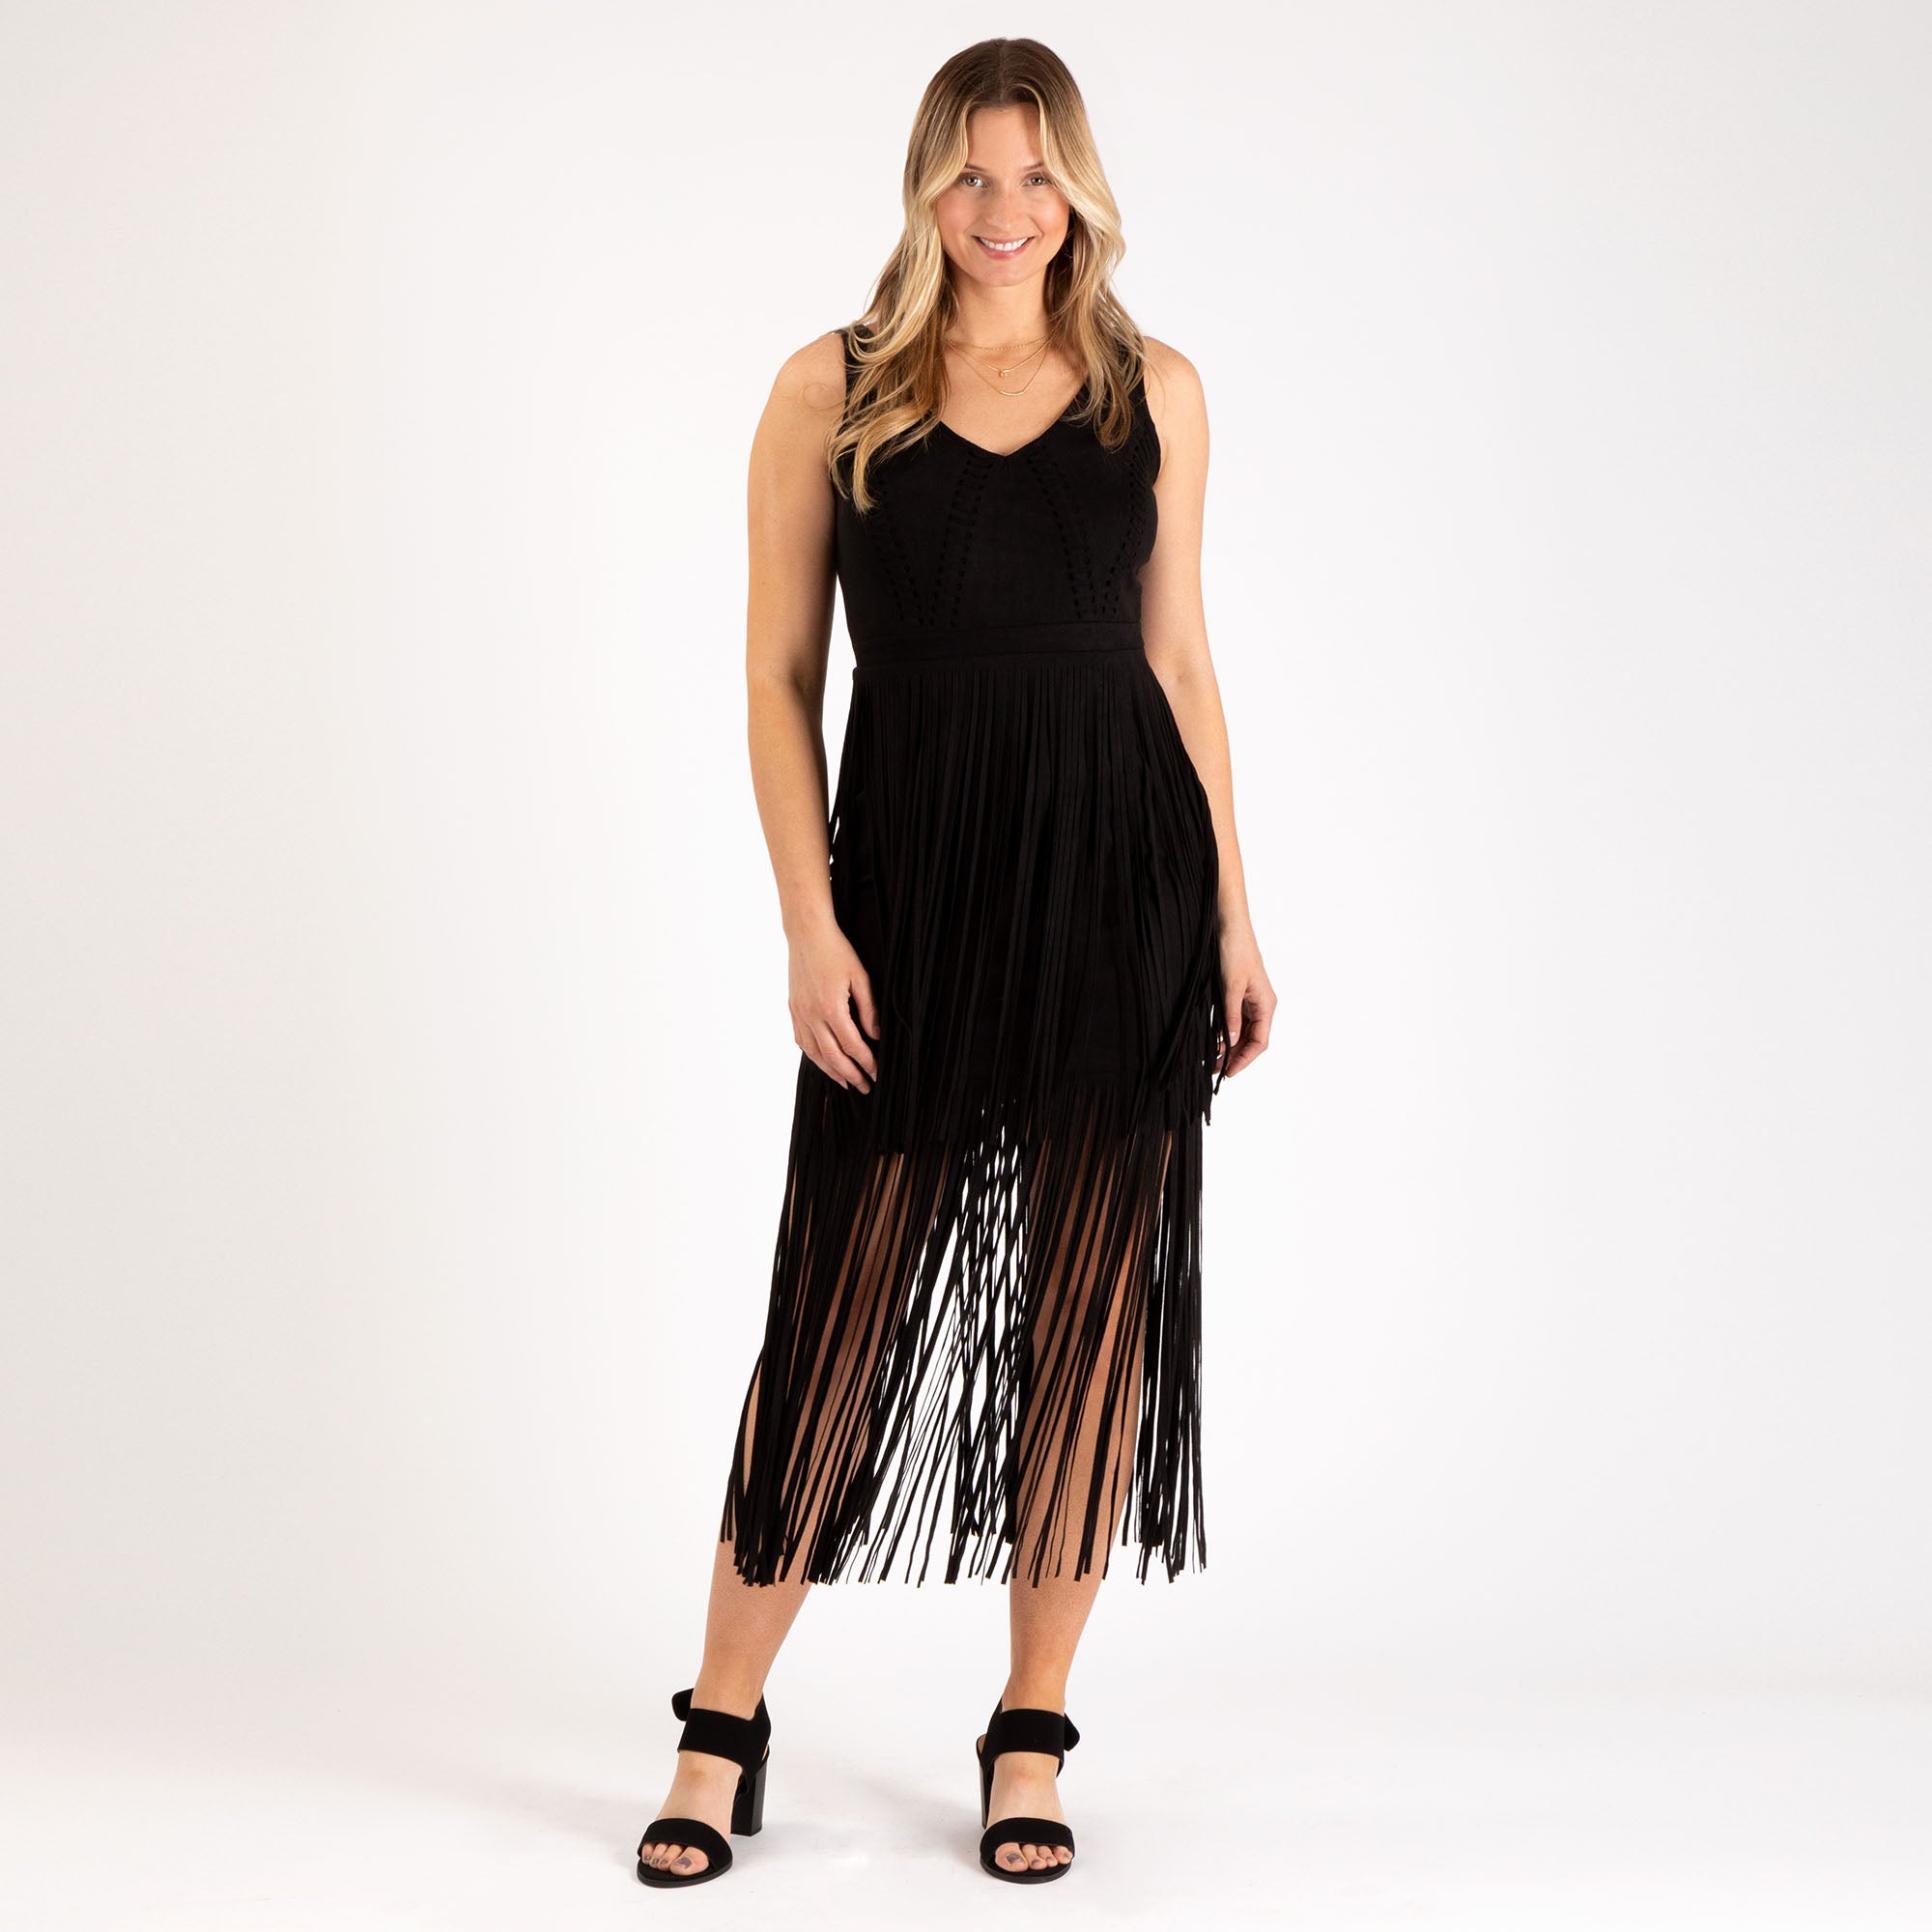 Southern Fringe Faux Suede Dress - S